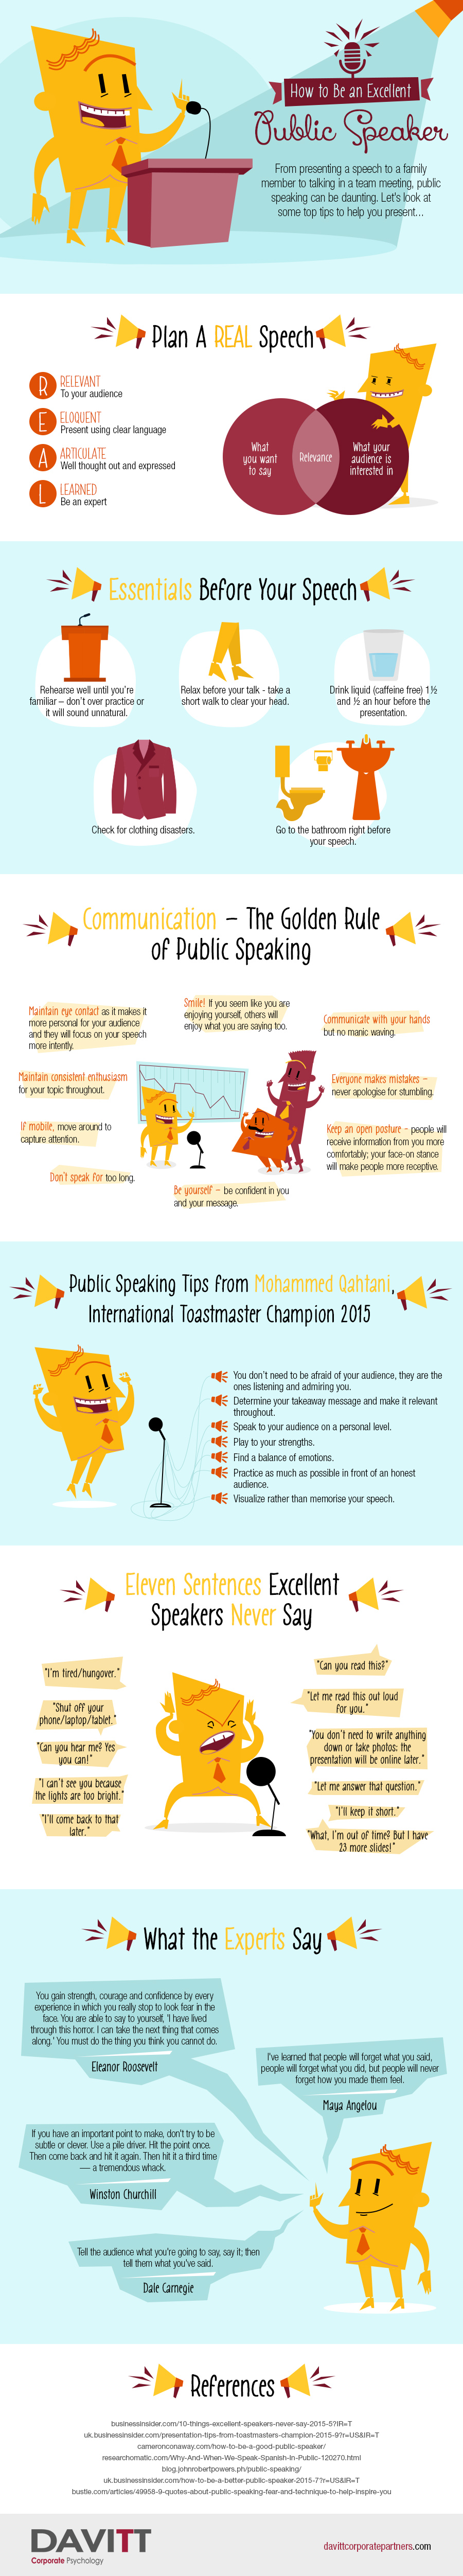 how-to-be-an-excellent-public-speaker-infographic